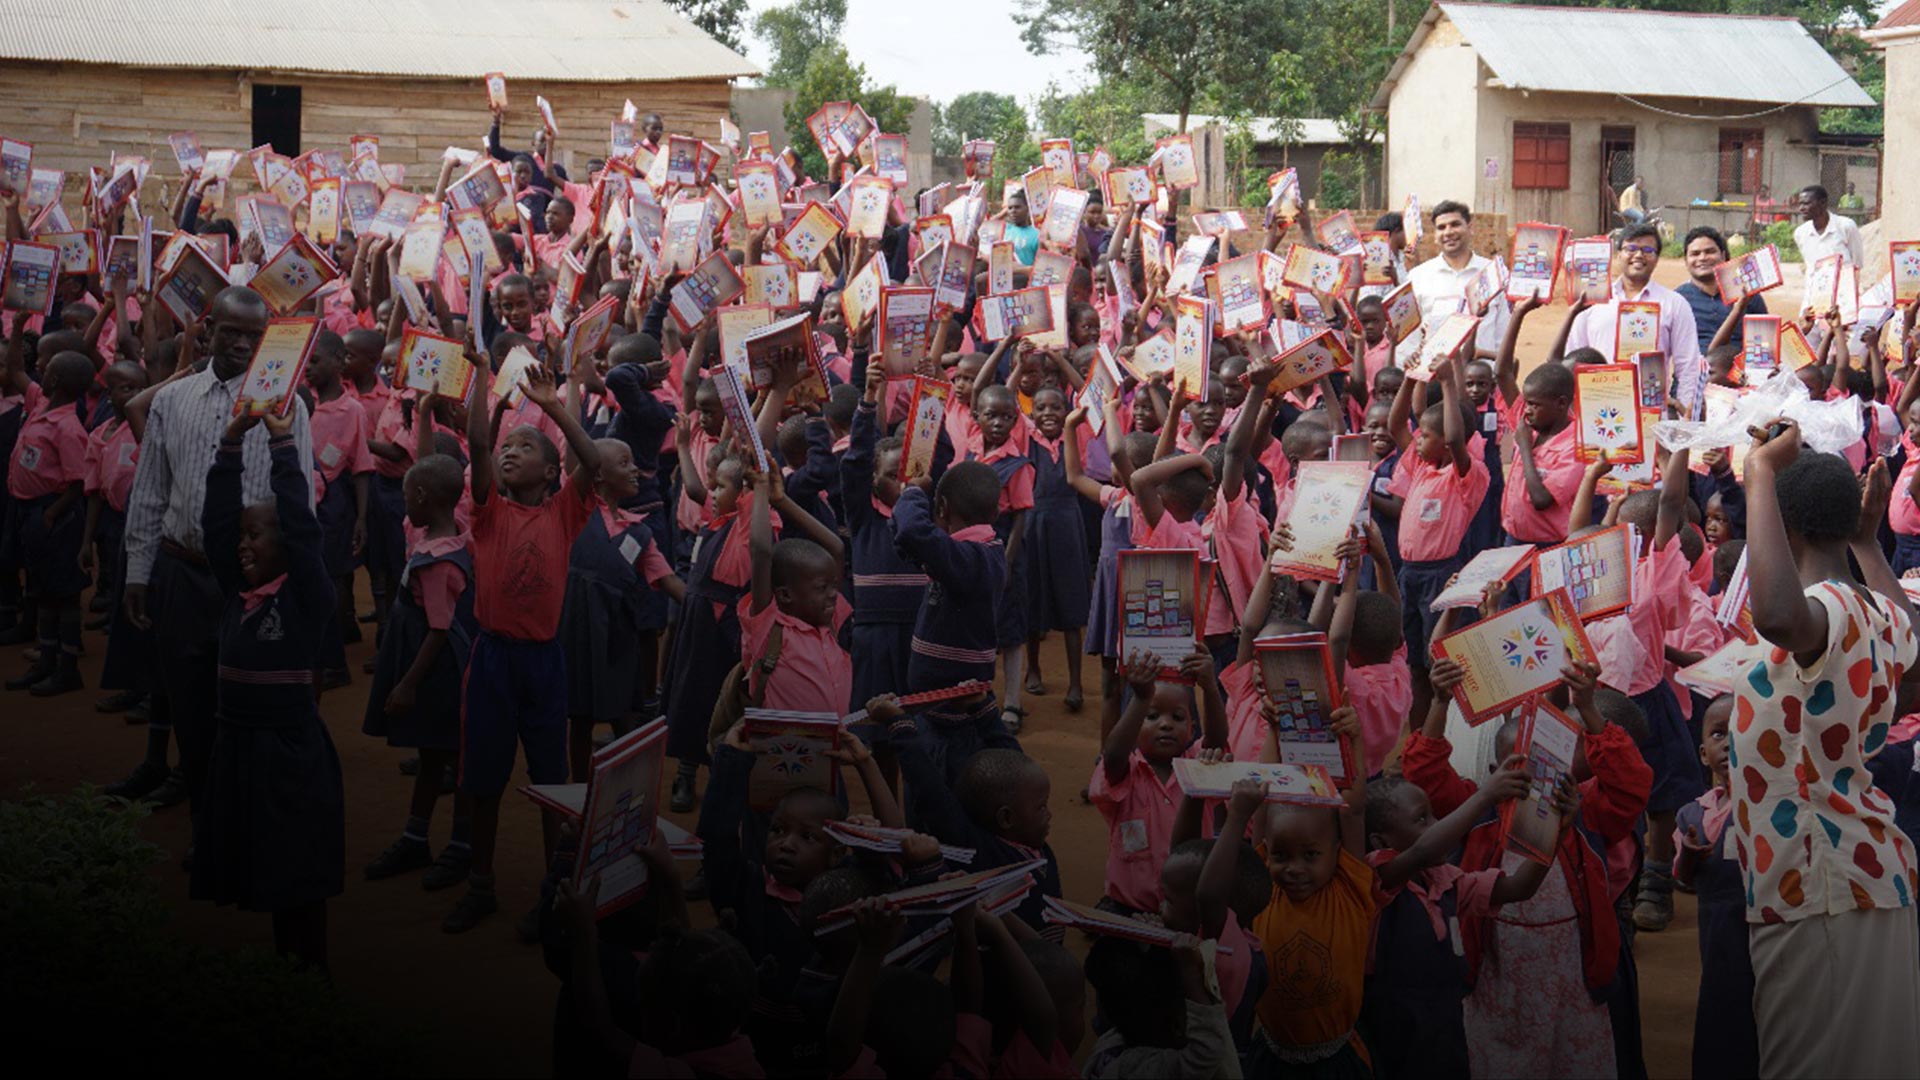 Africure is distributing 225,000 books in Africa to under privileged school children as part of its CSR